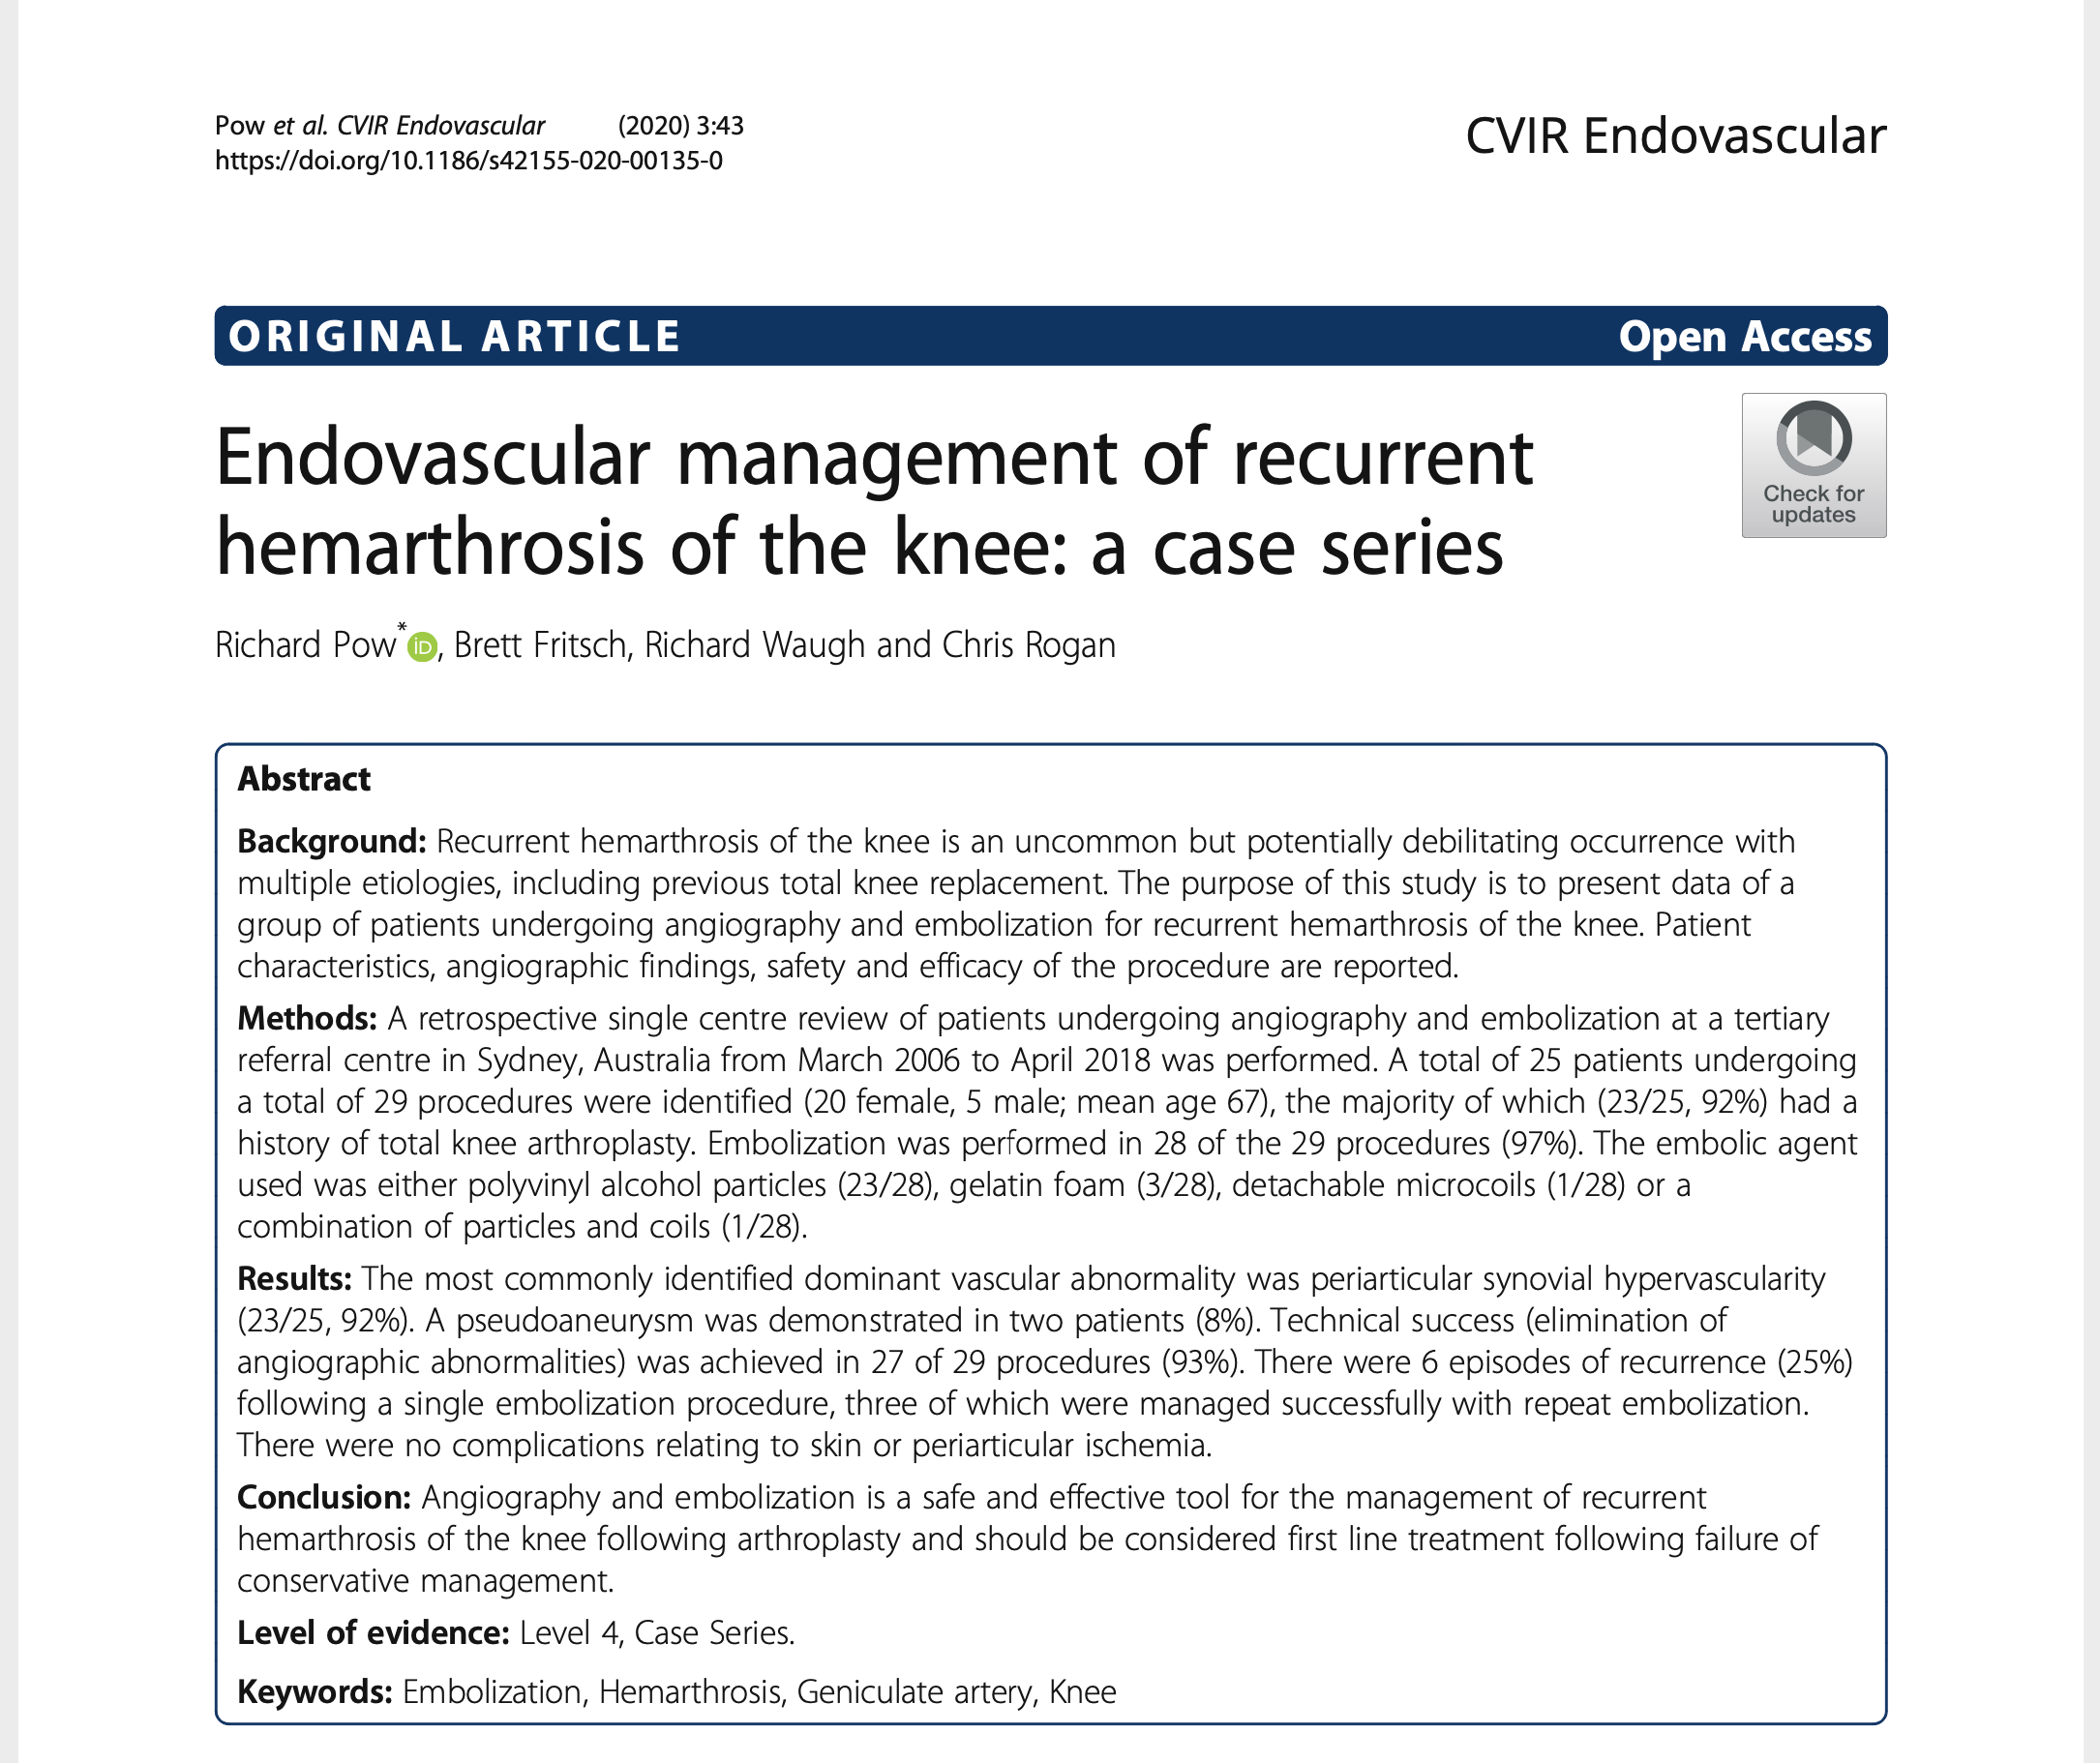 Our new paper has been published on embolisation of the knee